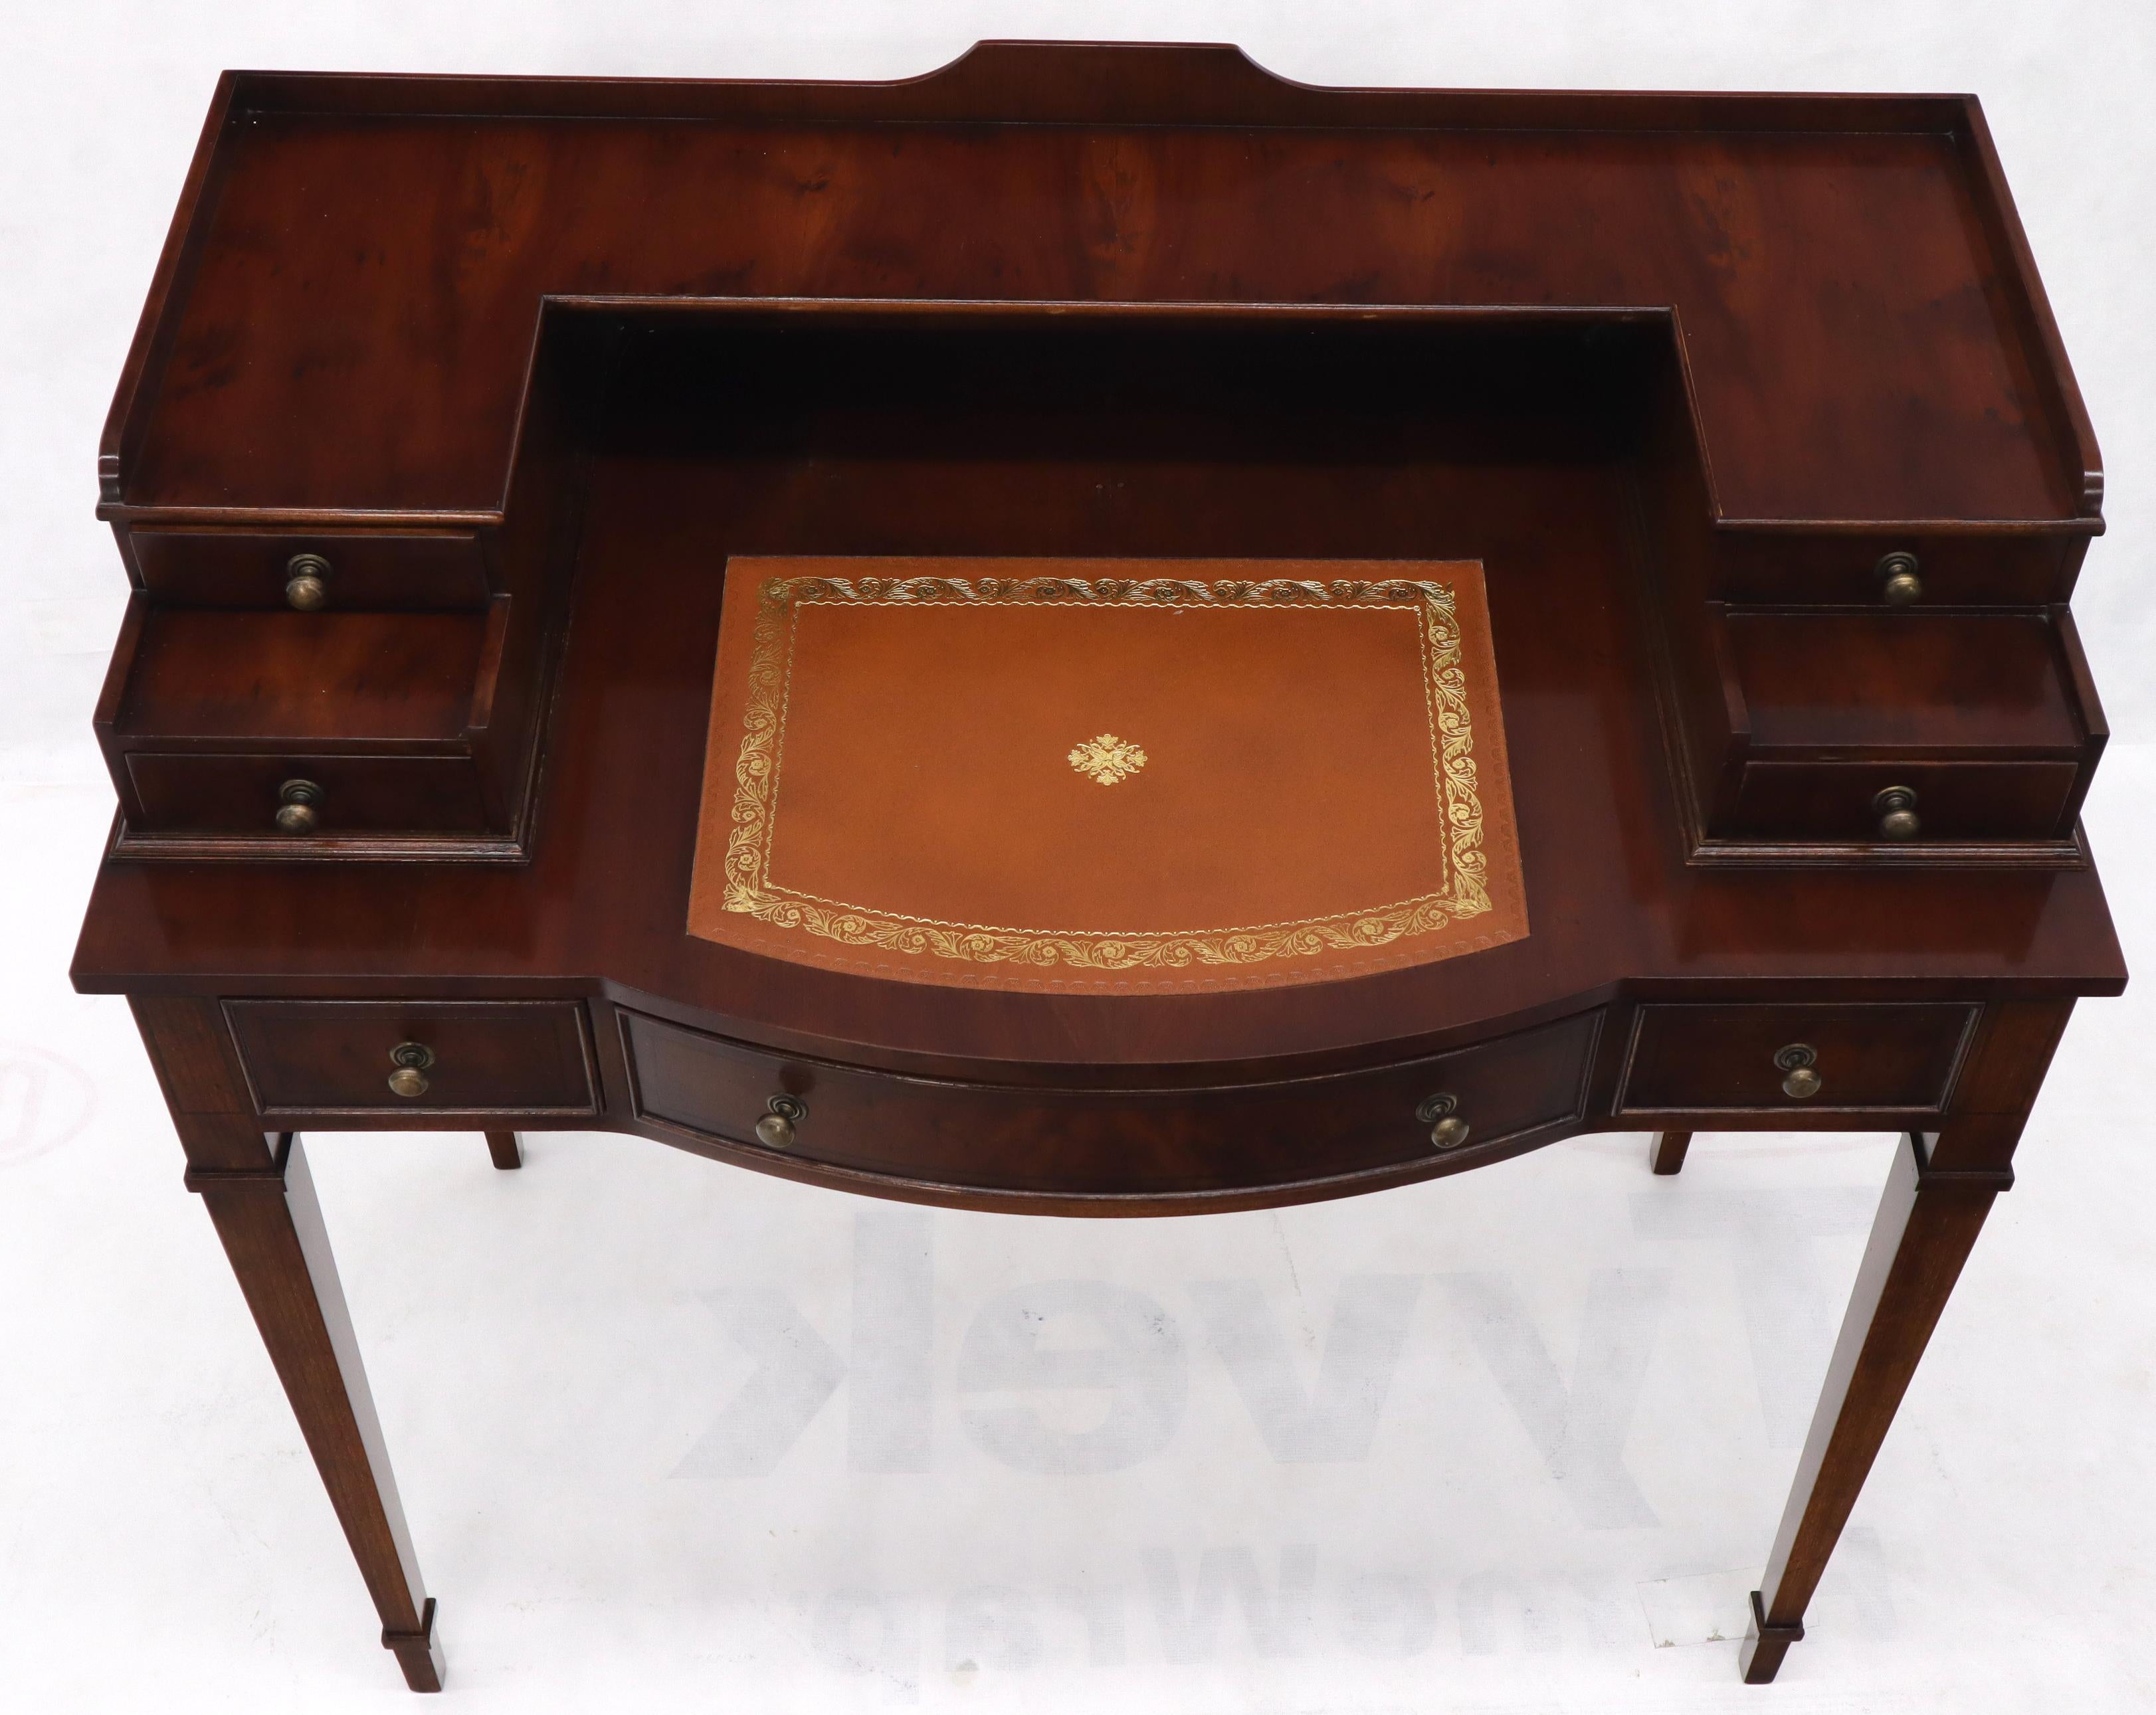 Petit English Multi Drawer Compartment Mahogany Leather Top Desk In Good Condition For Sale In Rockaway, NJ